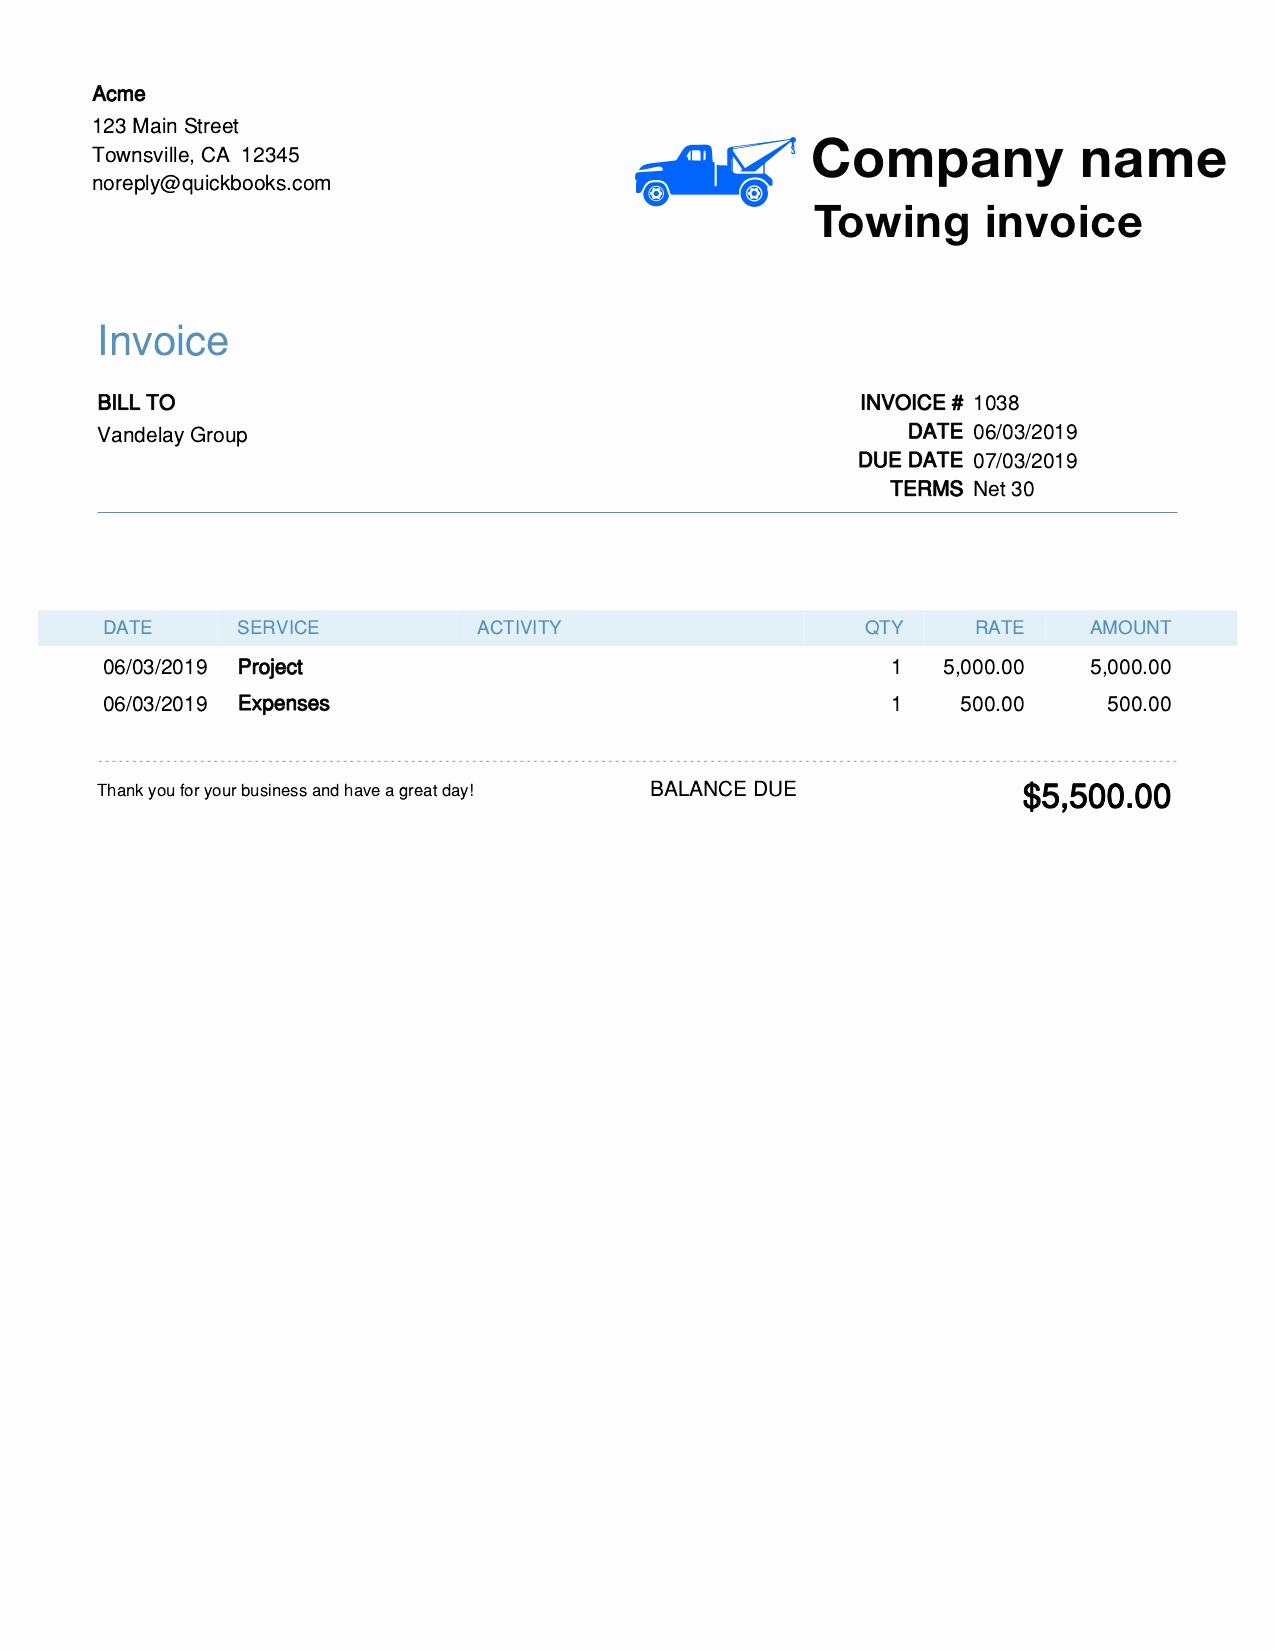 Free towing Invoice Template Awesome Free towing Invoice Template Customize and Send In 90 Seconds